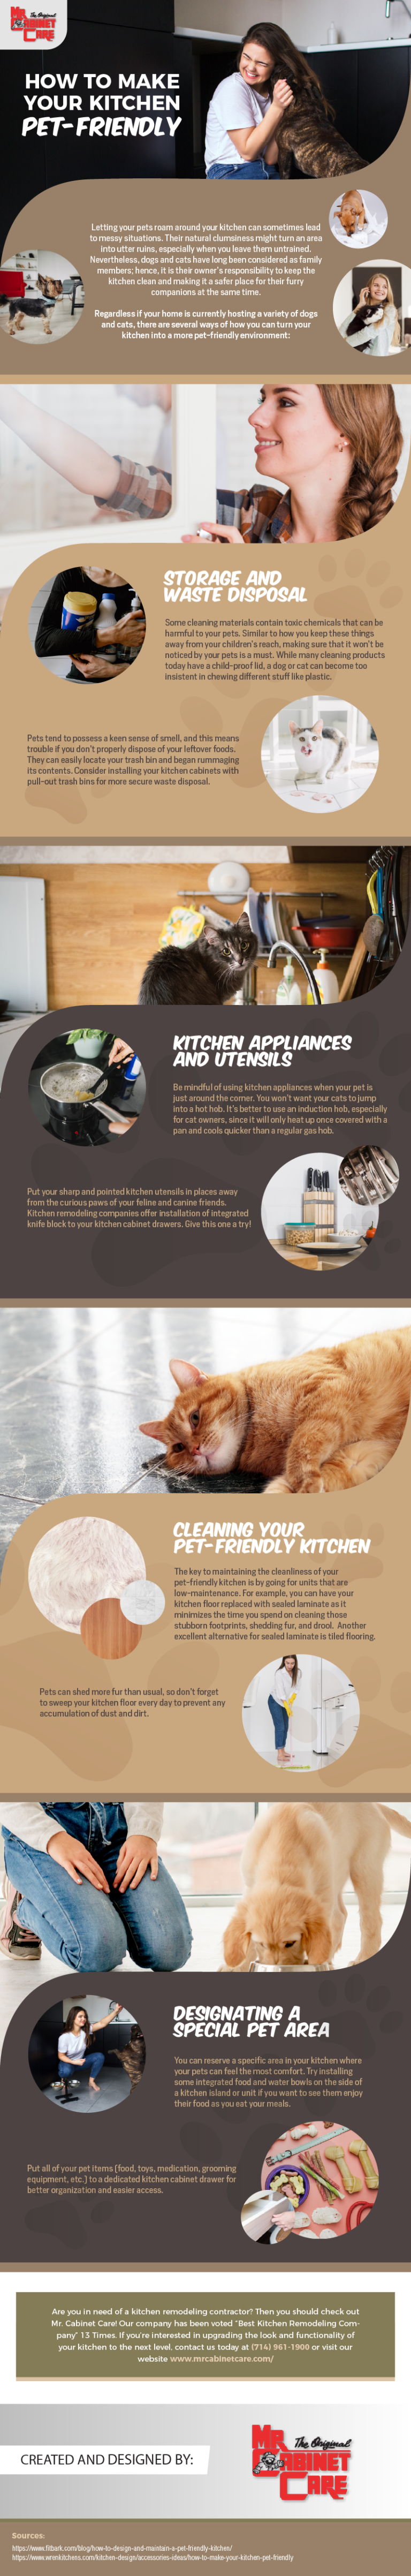 How to Make Your Kitchen Pet-Friendly